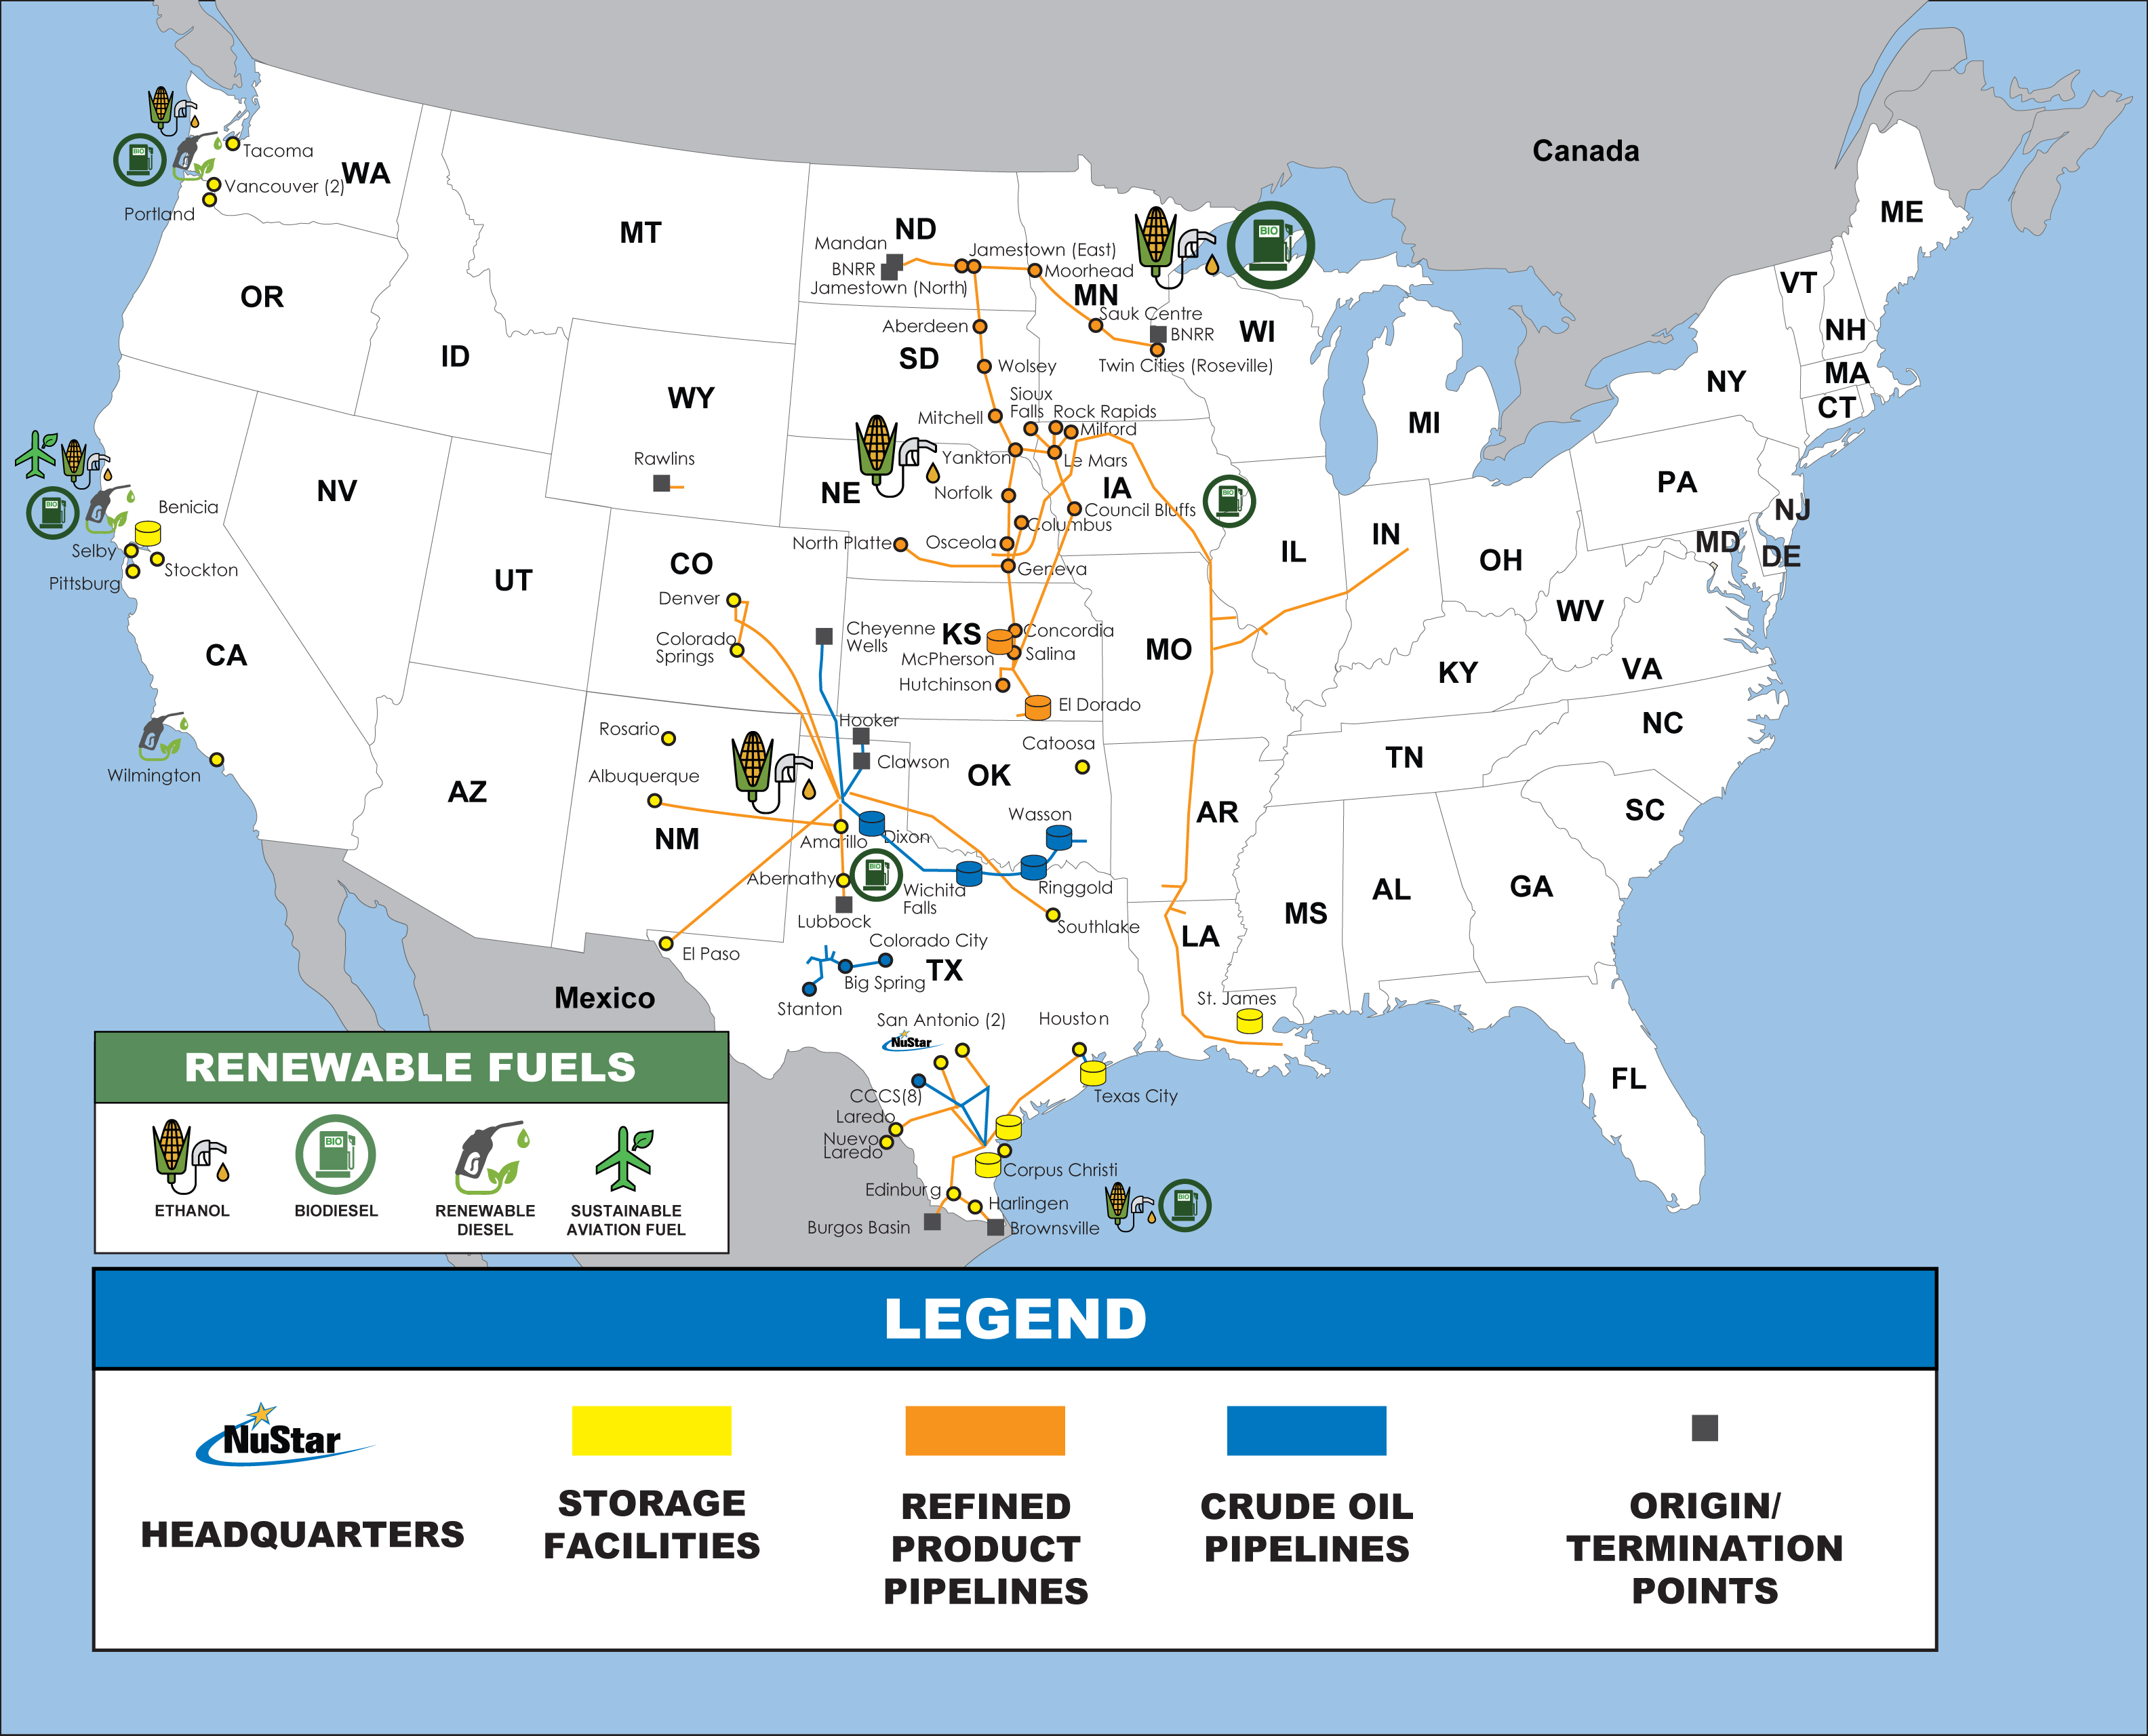 Map of North America showing NuStar’s headquarters located in San Antonio, TX. The map highlights renewable fuels of location of ethanol, biodiesel and renewable diesel.